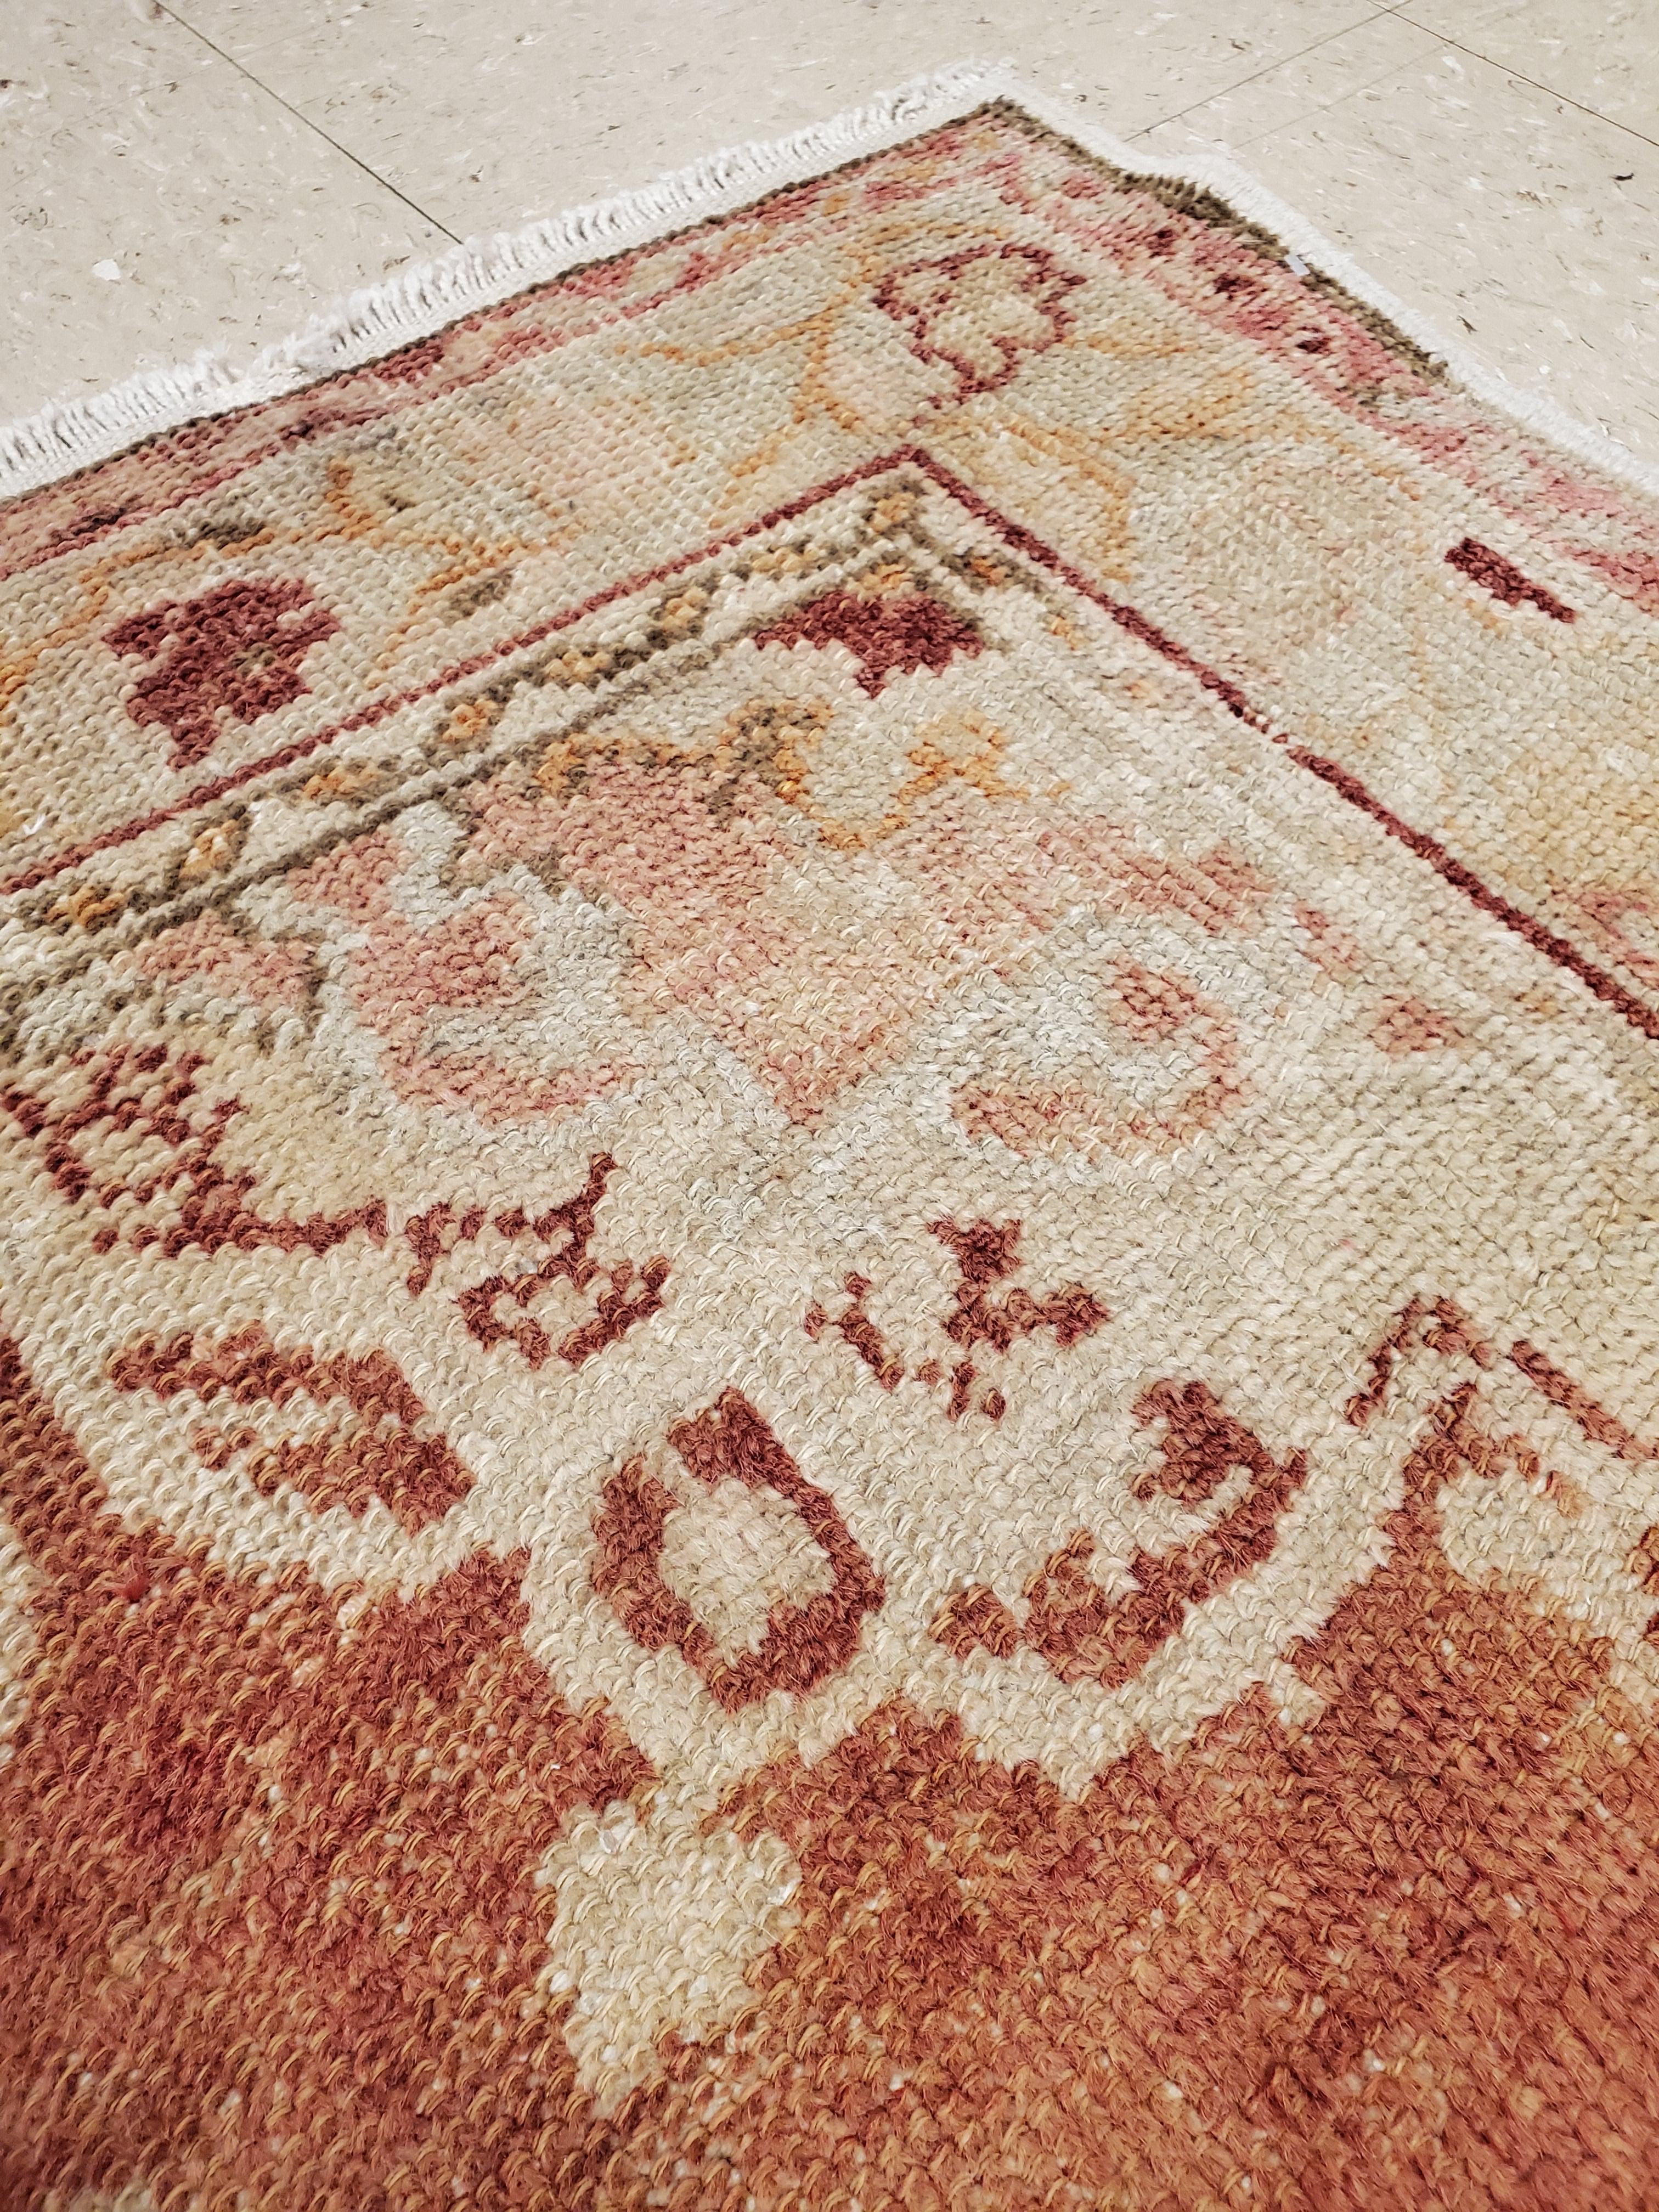 Antique Oushak Runner, Turkish and Oriental Rug, Handmade Beige and Orange Rug In Good Condition For Sale In Port Washington, NY